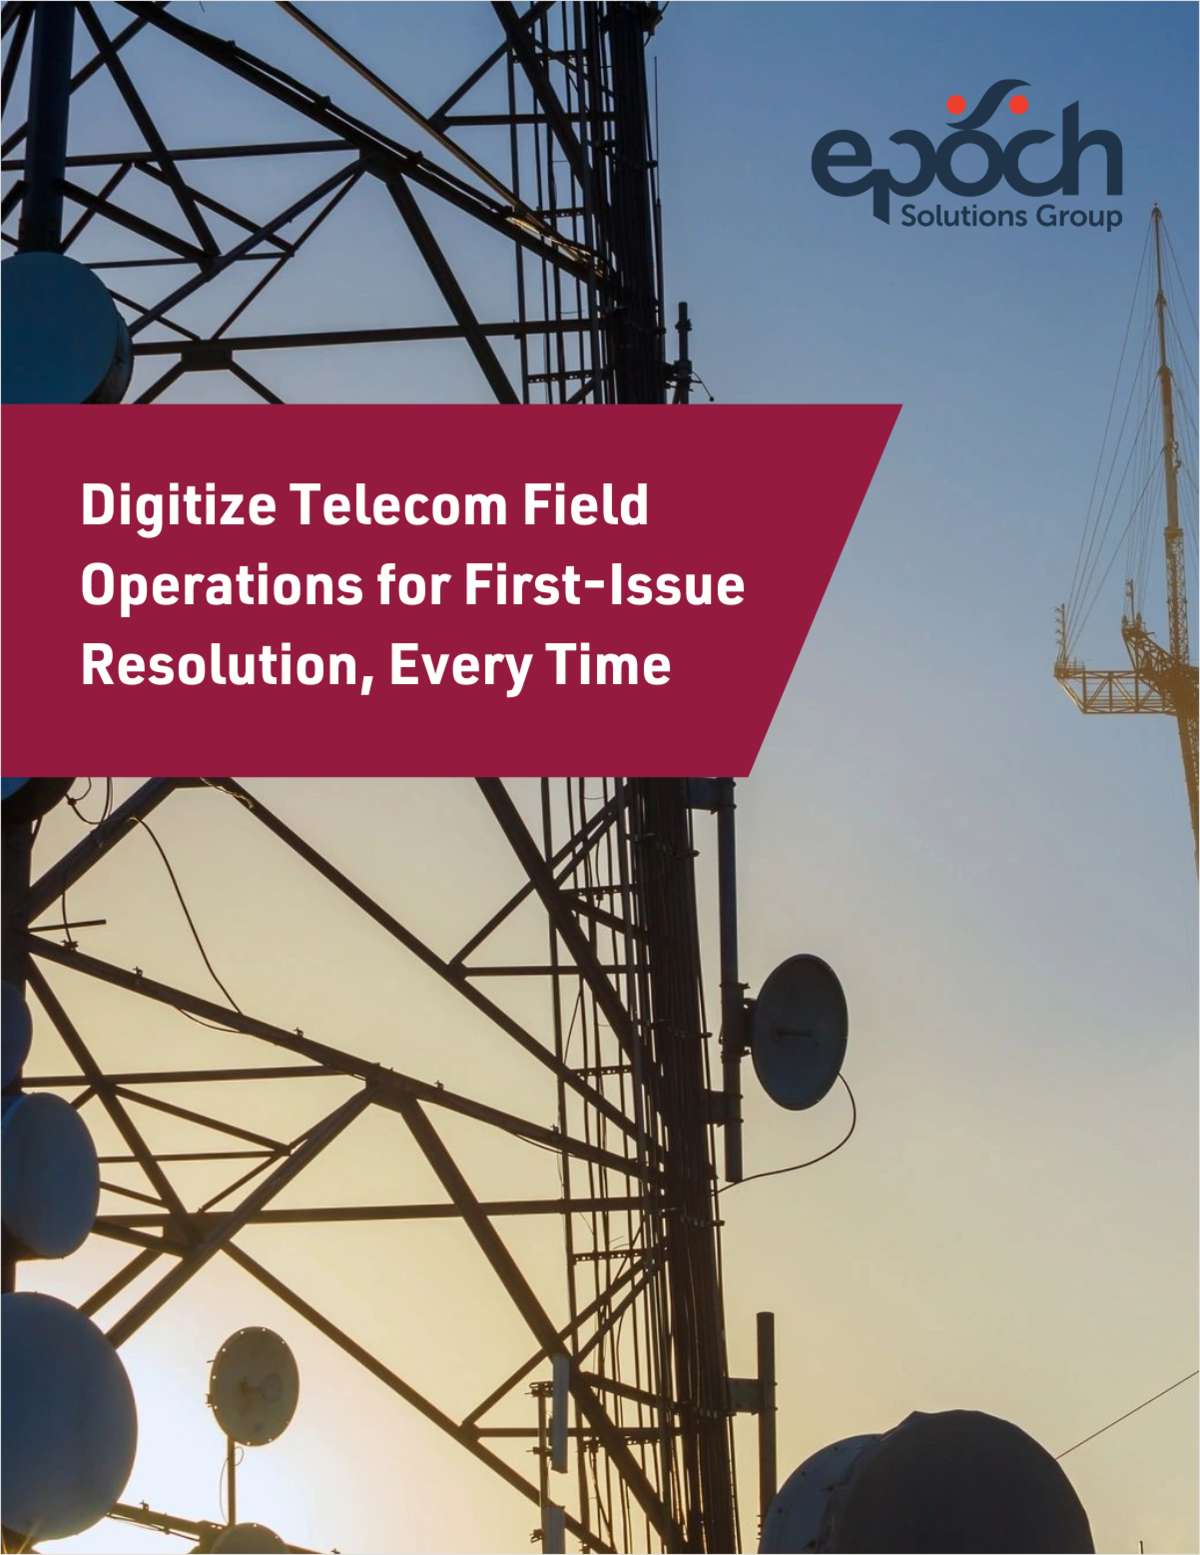 Digitize Telecom Field Operations for First-Issue Resolution, Every Time